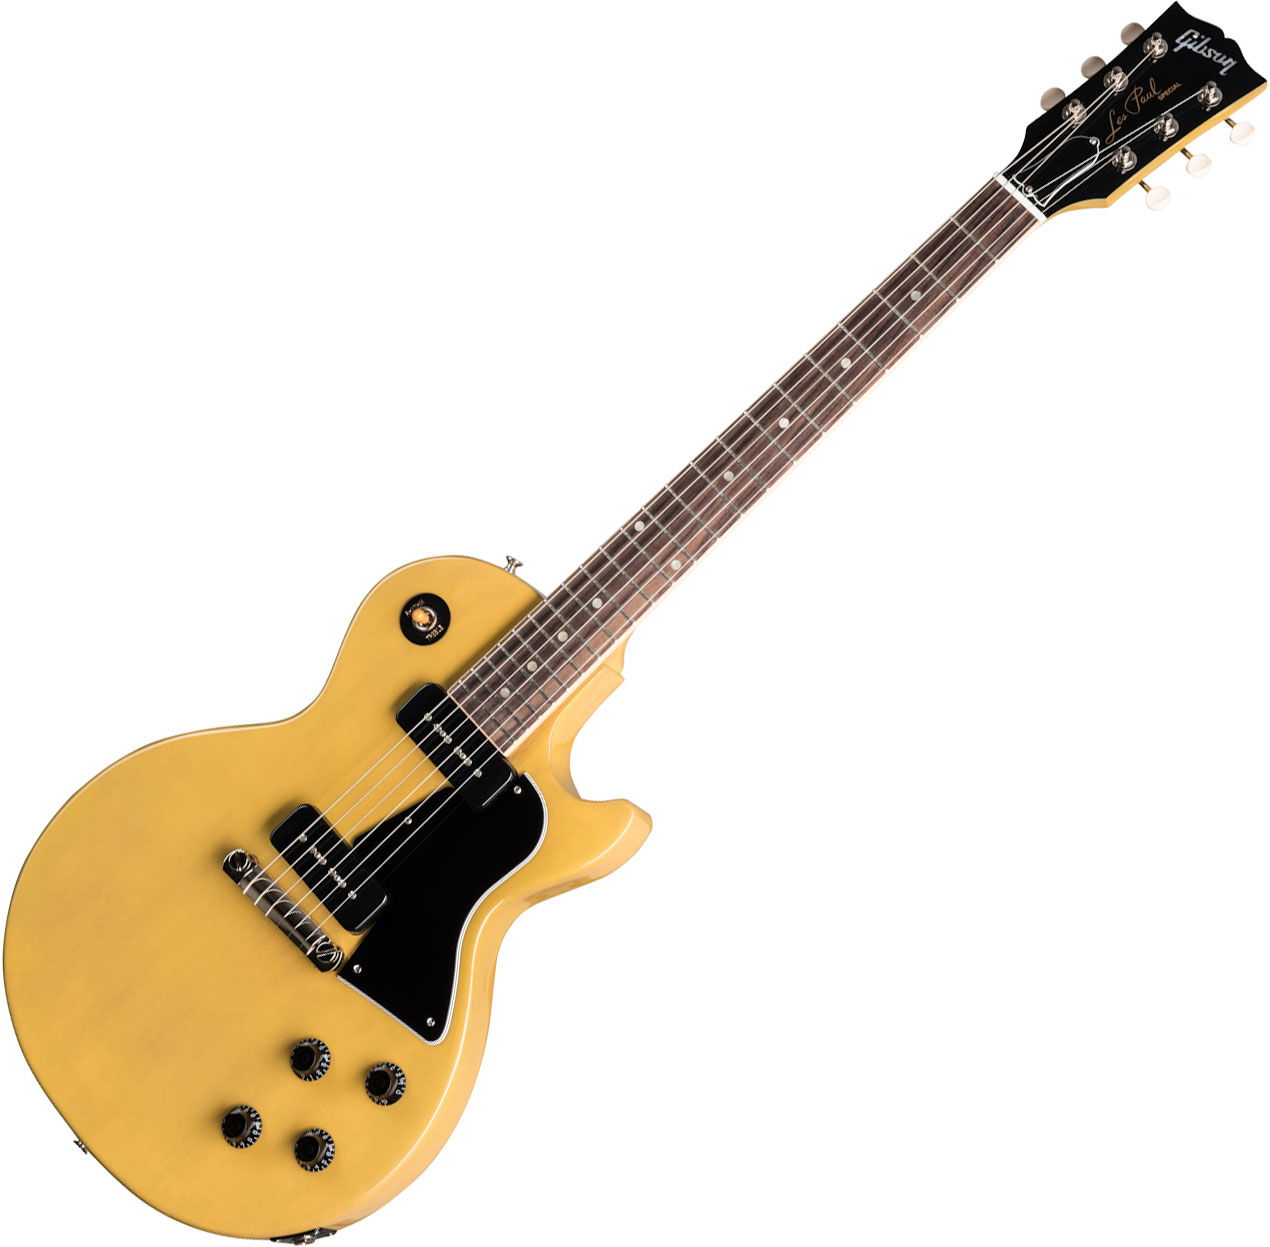 Gibson Les Paul Special Tv Yellow Yellow Solid Body Electric Guitar